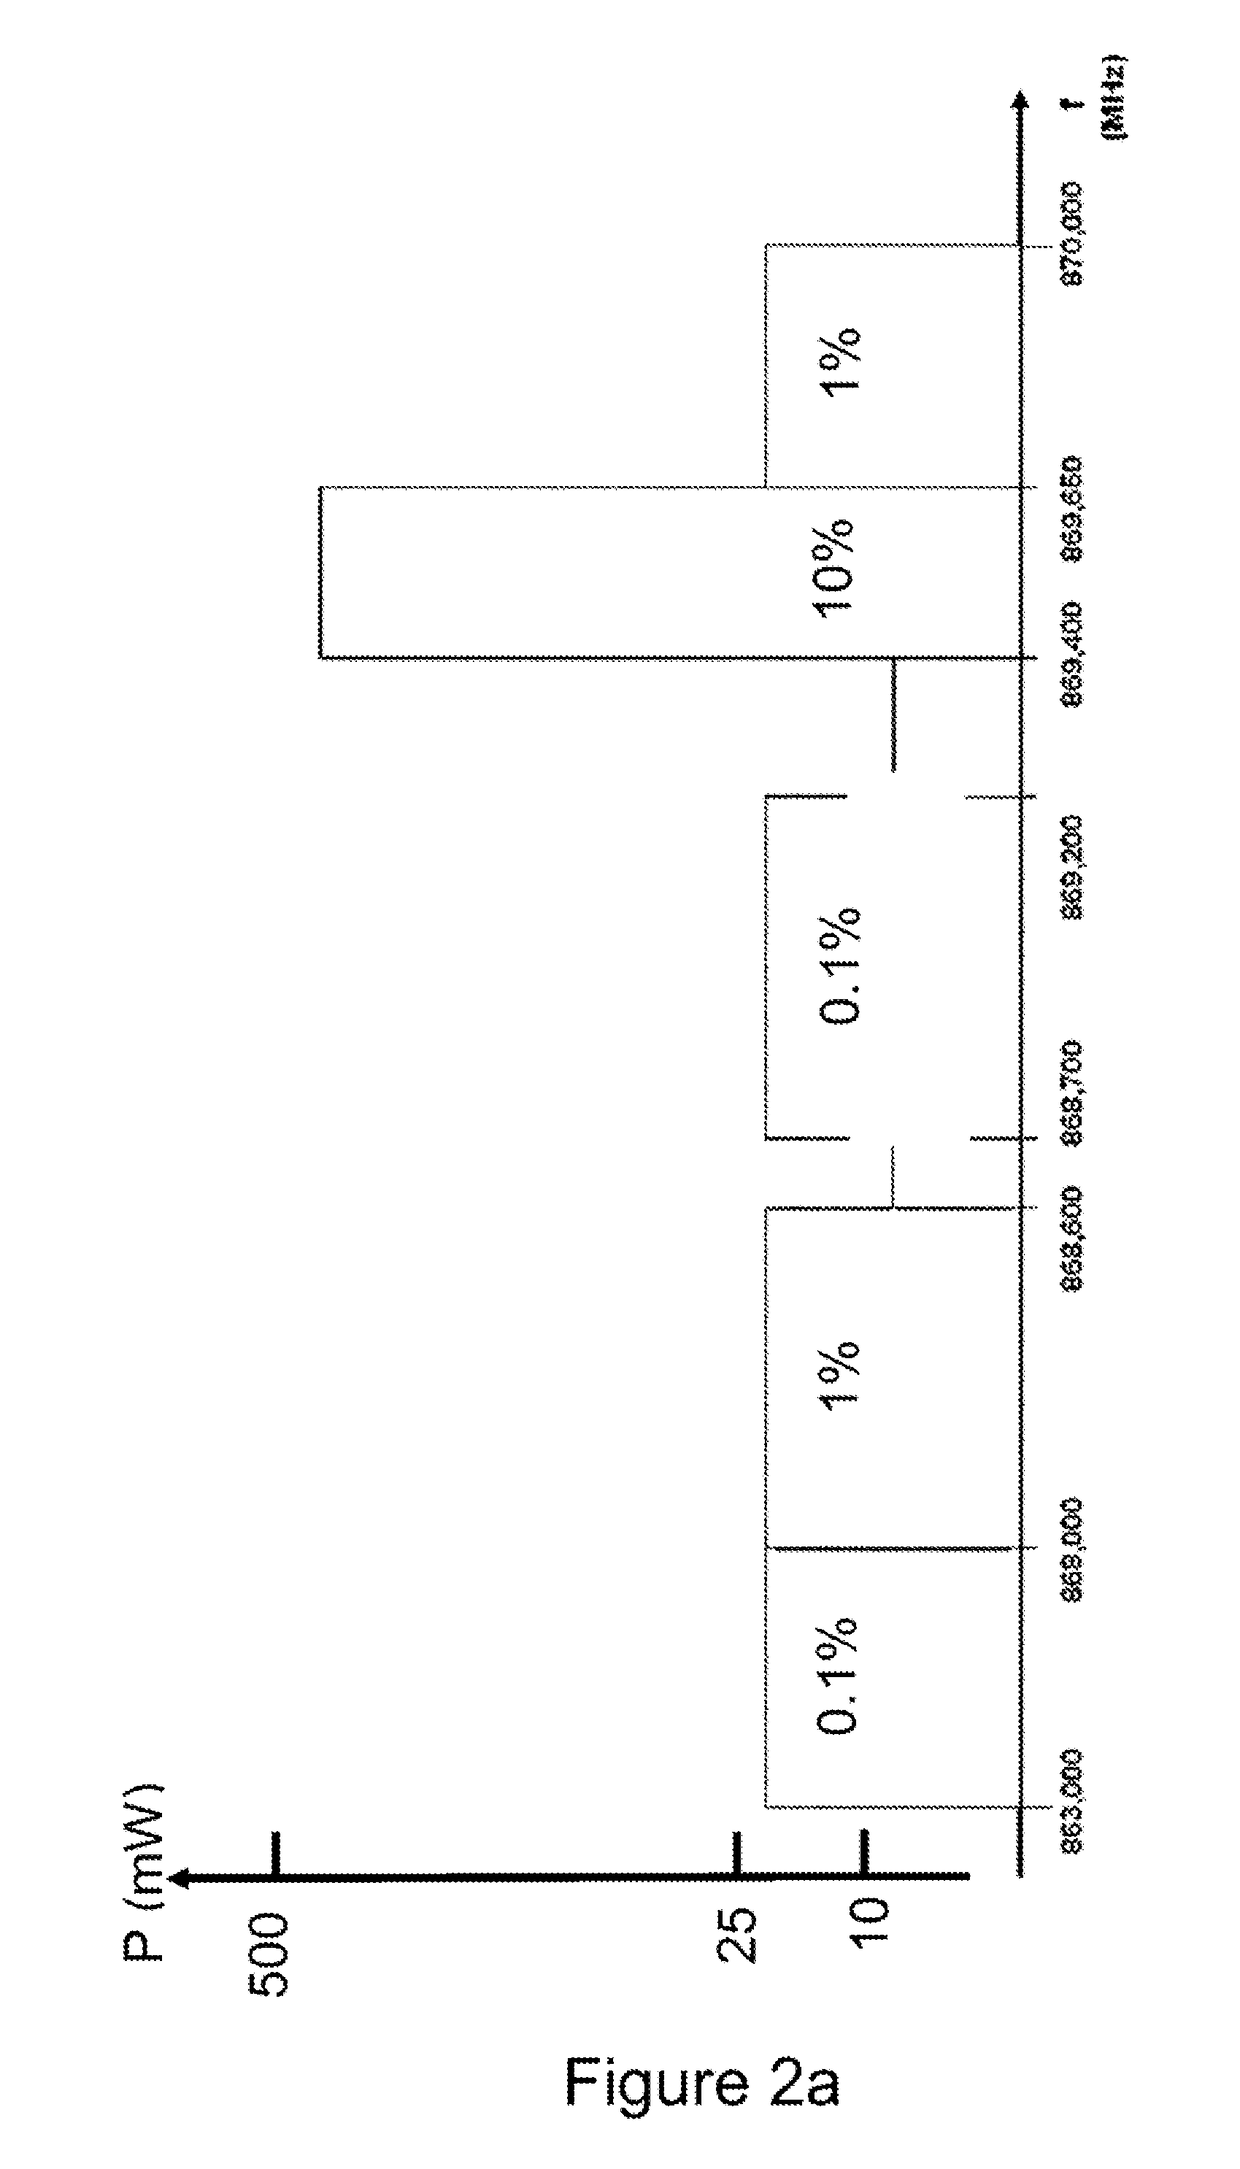 Method and device for wireless communication between connected objects and gateways